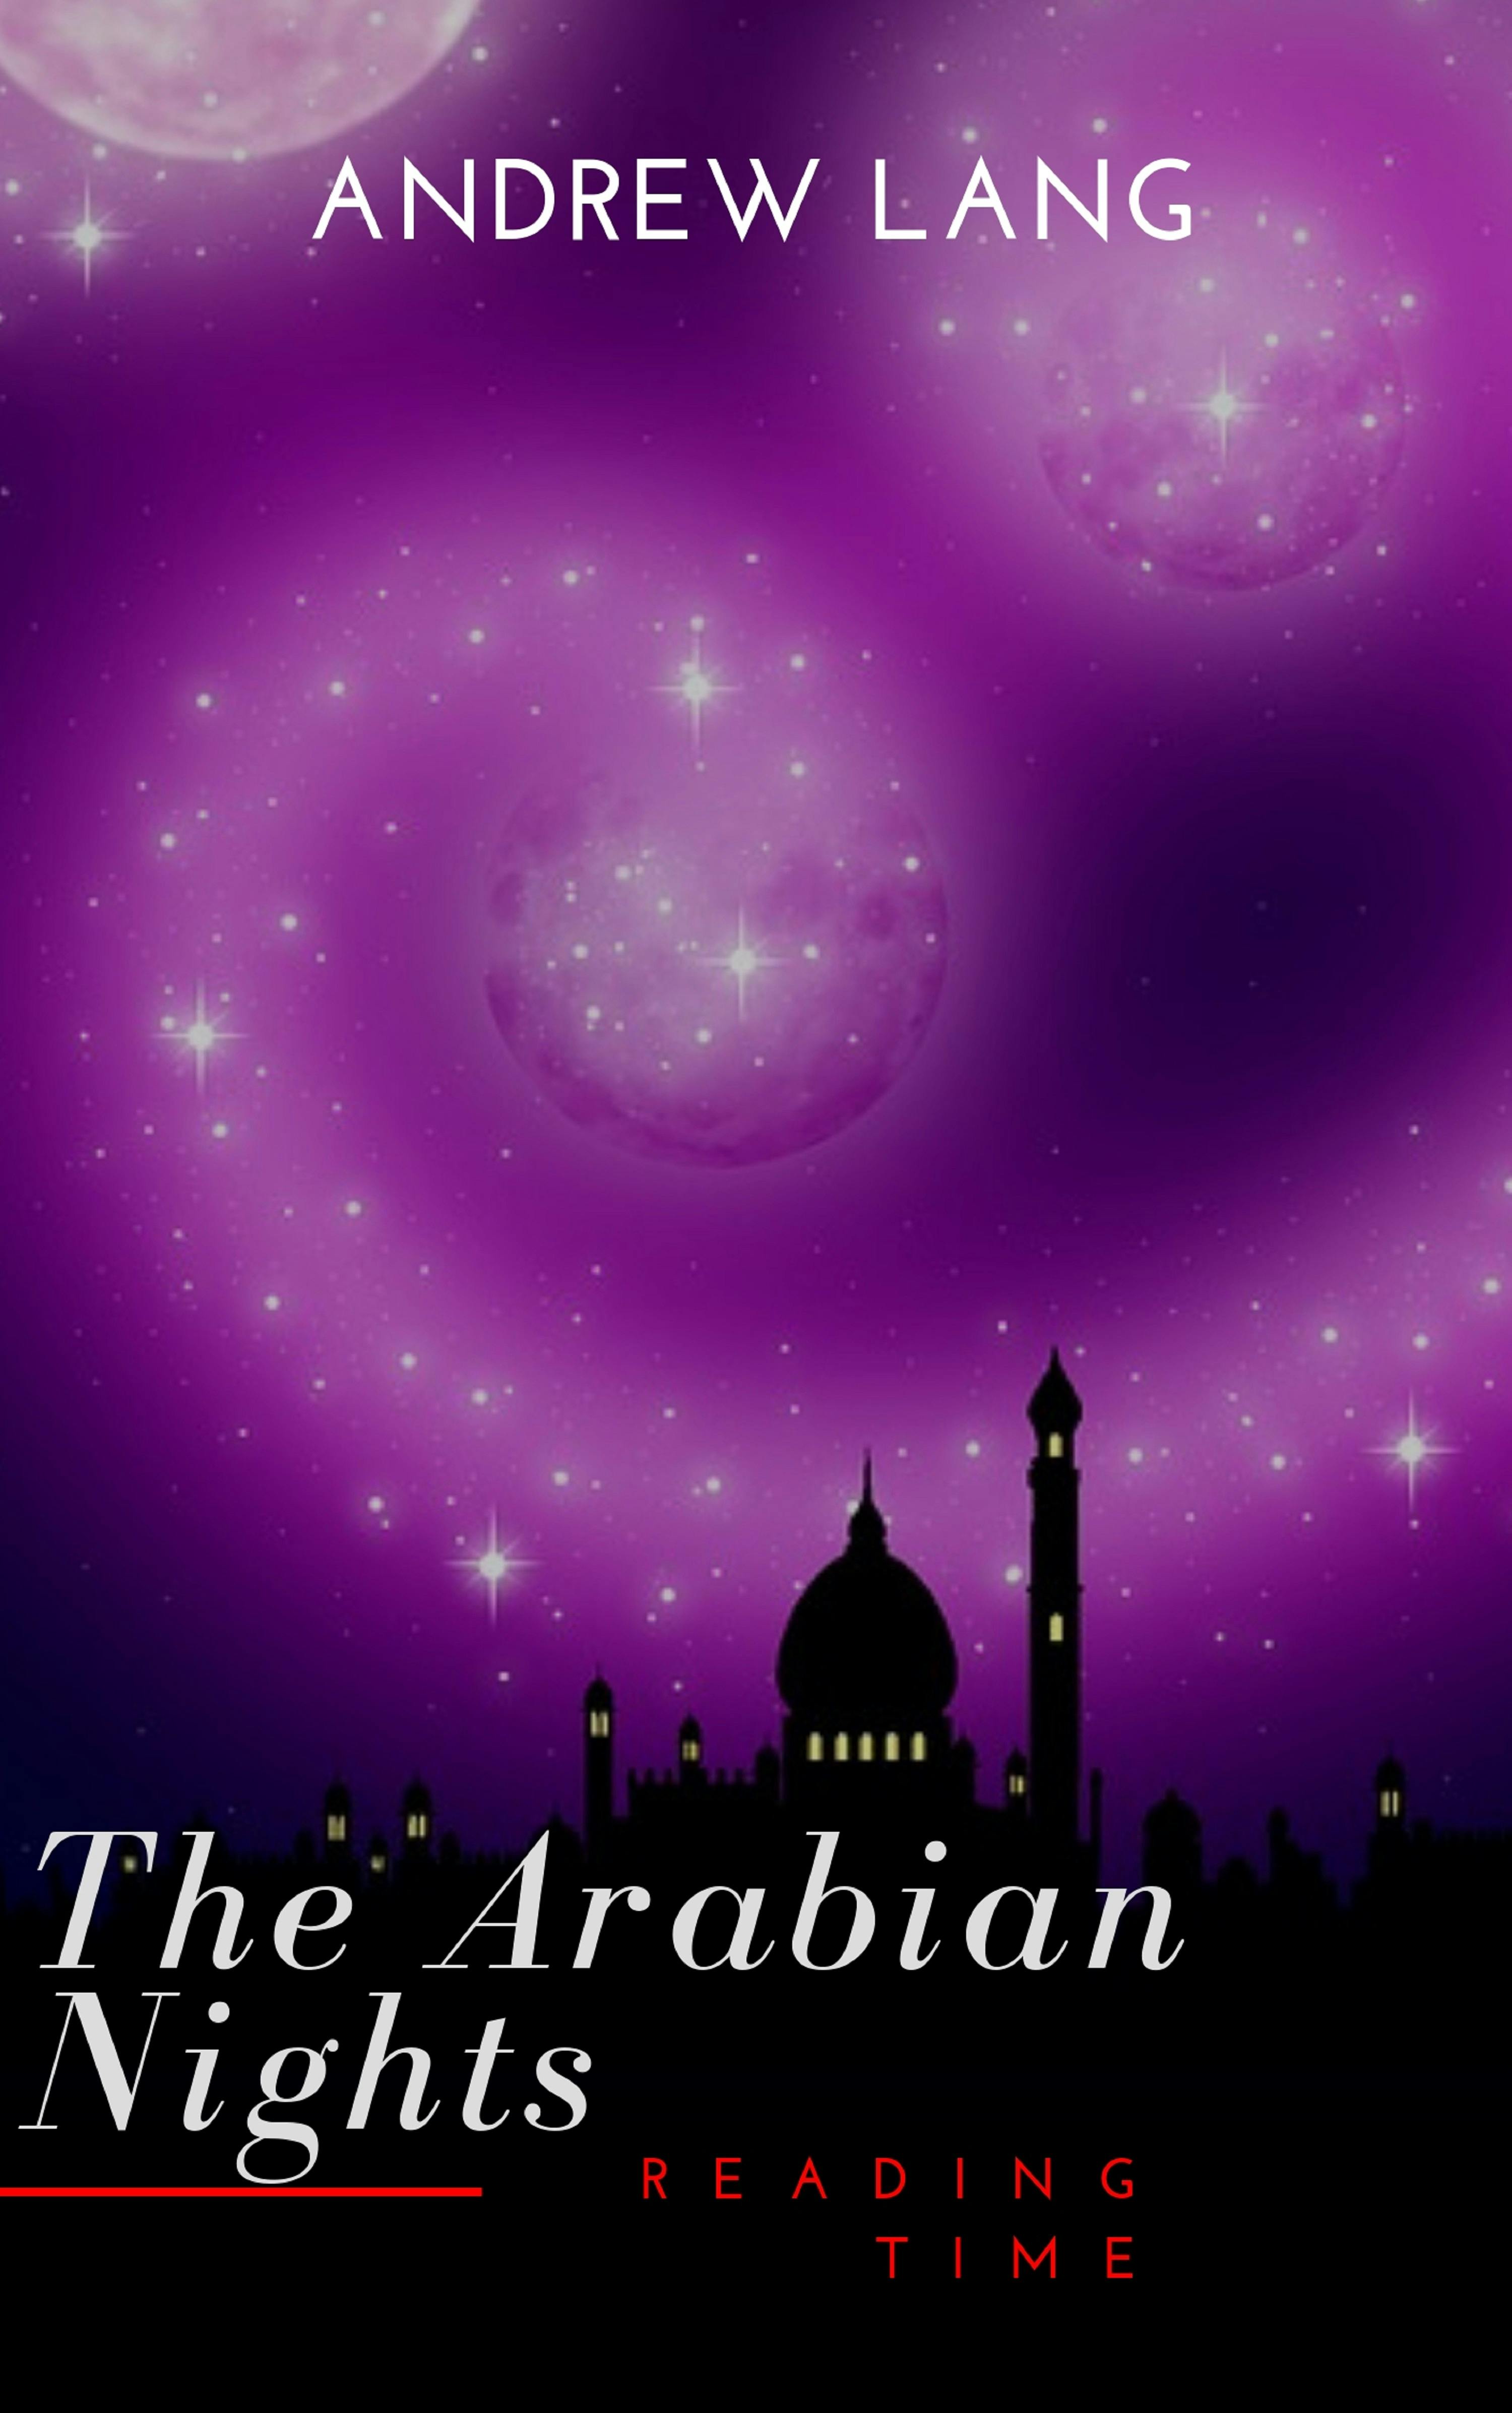 The Arabian Nights - Reading Time, Andrew Lang